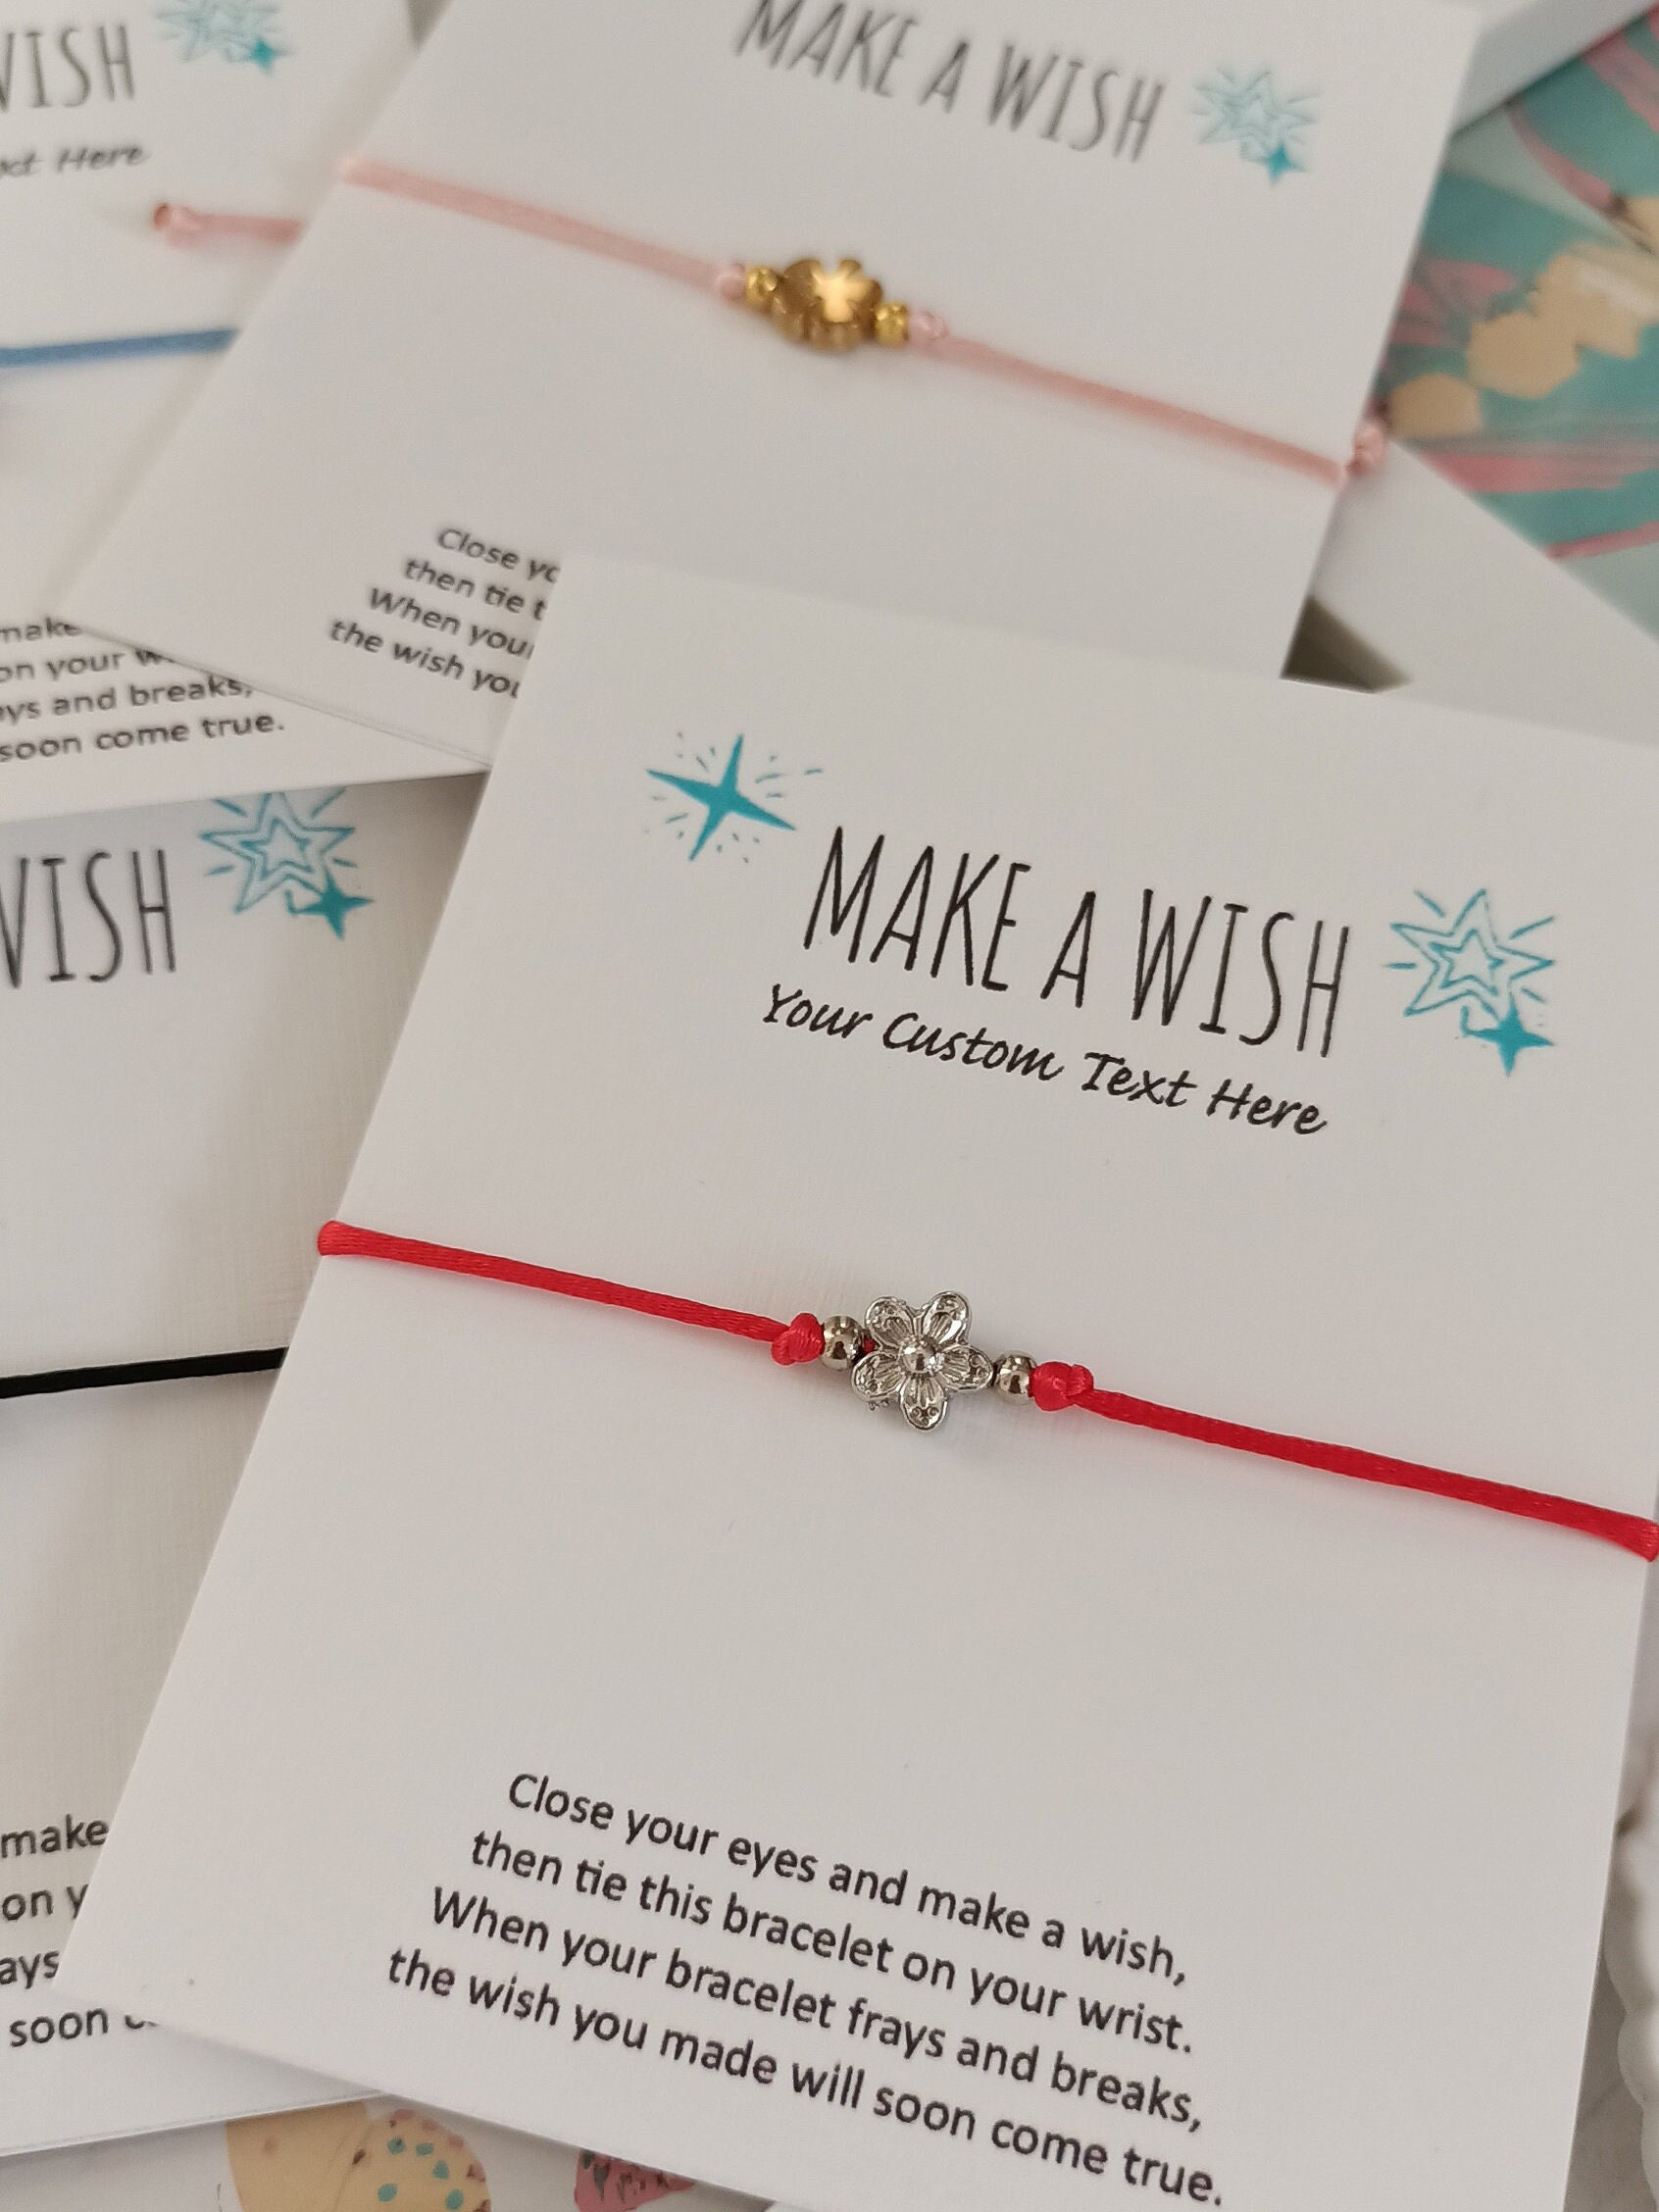 Merry Christmas Wish Bracelet, Christmas Jewelry, Christmas Gifts Under 5  Dollars, Stocking Stuffers, Holiday Gifts for Coworkers, Friends -   Israel